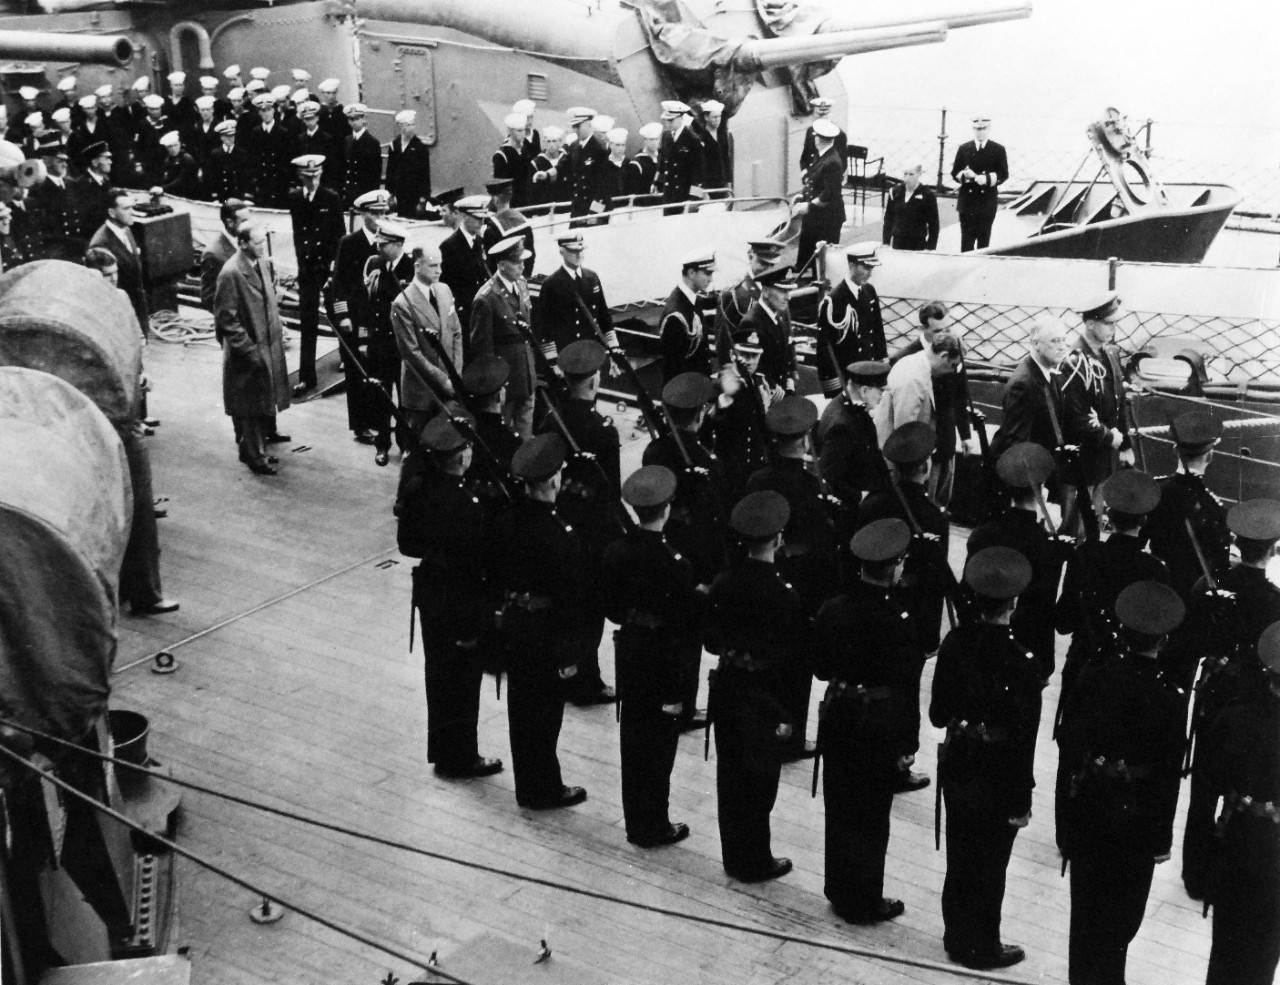 80-G-26856: Atlantic Charter, August 1941. President Franklin D. Roosevelt and staff coming onboard HMS Prince of Wales from USS Augusta (CA-31) during the Atlantic Charter meeting.   Photograph released August 1941.   Official U.S. Navy Photograph, now in the collections of the National Archives.  (2016/03/22).